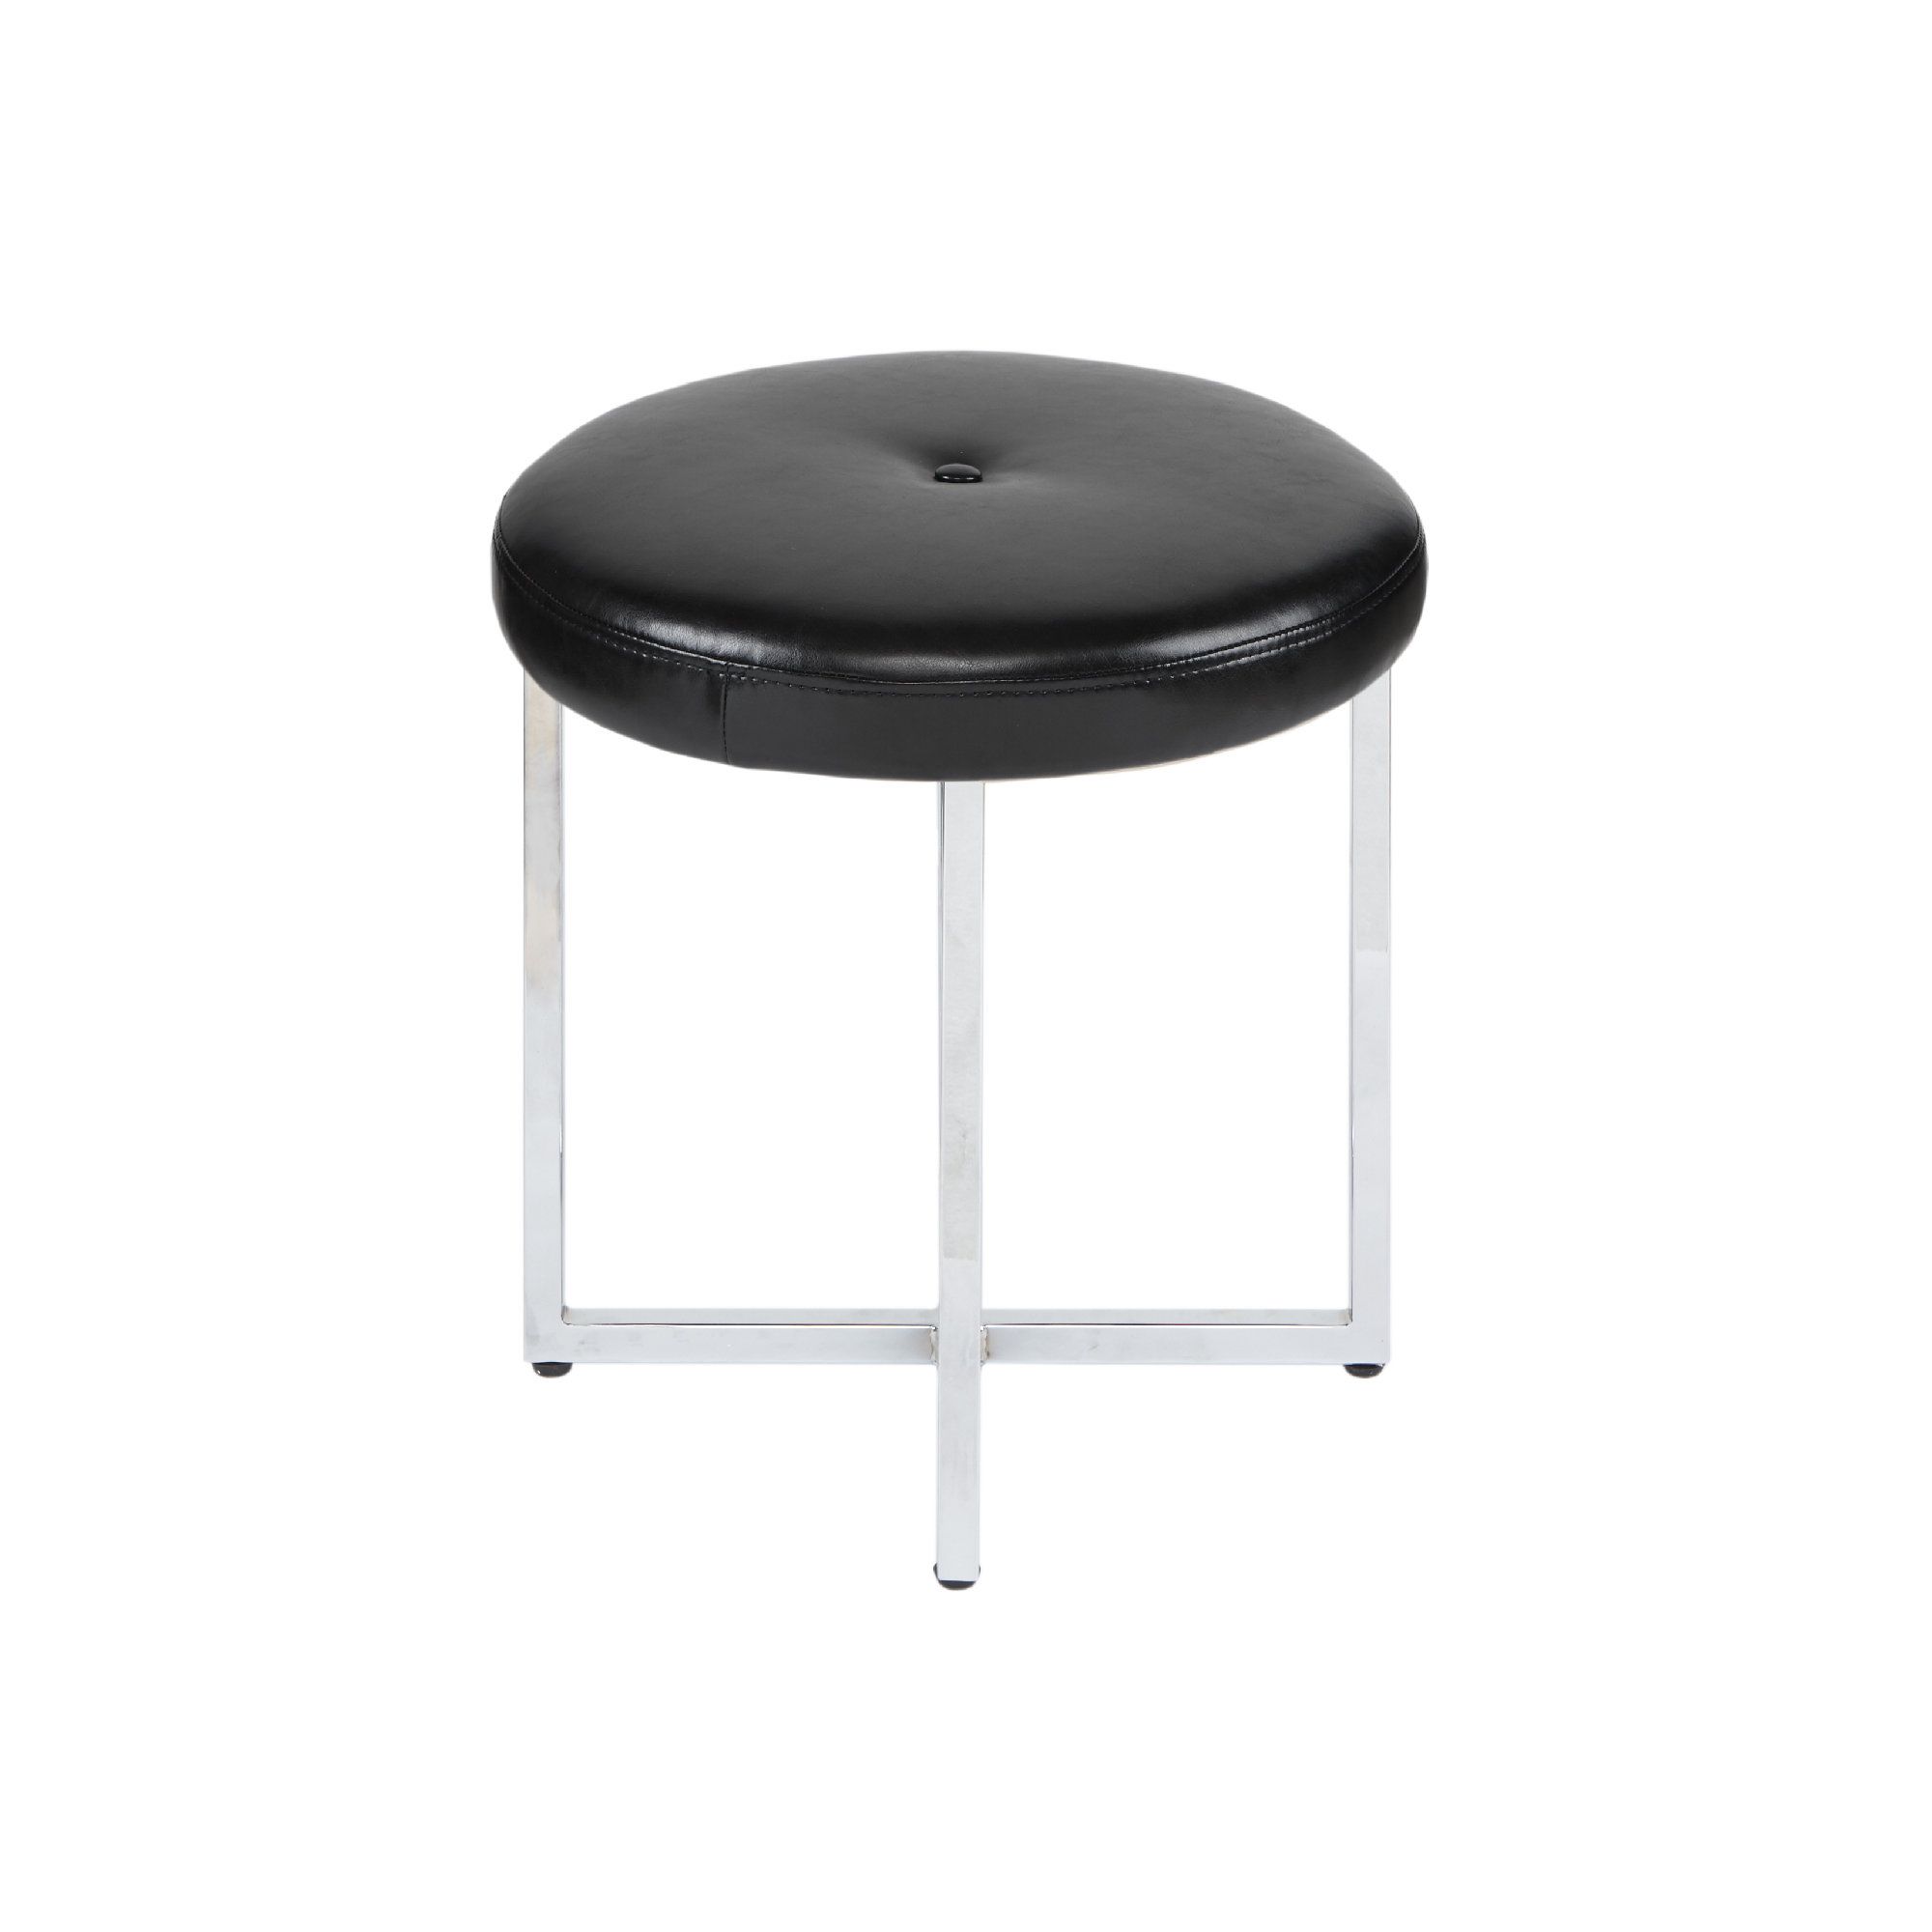 Widely Used Blanton Round Cocktail Tables In Ebern Designs Blanton Ottoman (View 3 of 20)